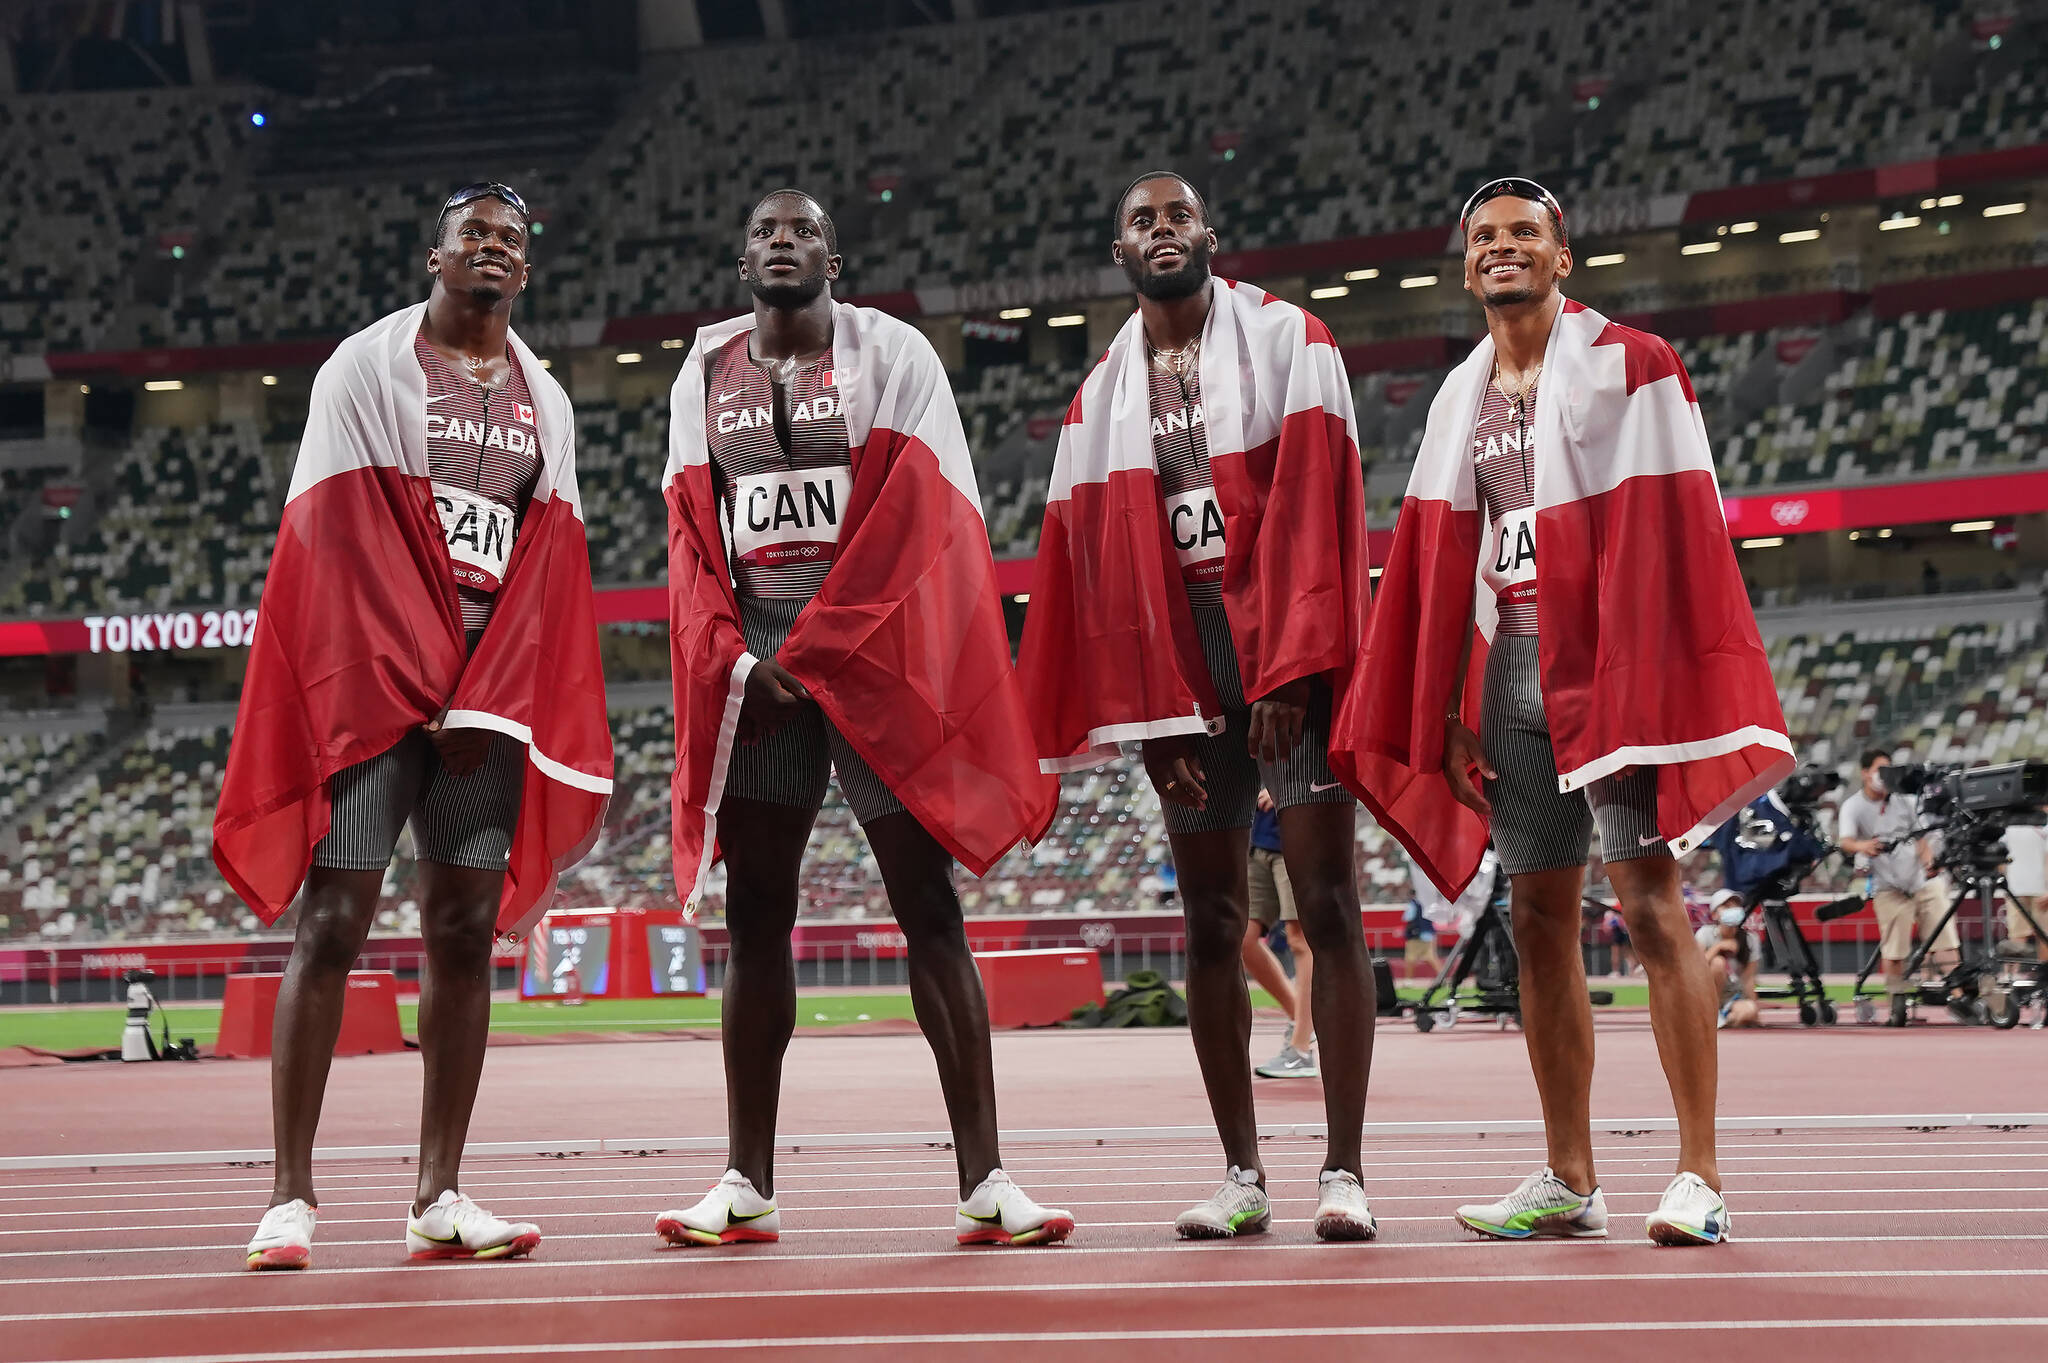 Memebrs of Canada’s 4 X100-metre relay team celebrate their bronze medal win during the Tokyo Olympics in Tokyo, Japan on Friday, Aug.6, 2021. THE CANADIAN PRESS/Nathan Denette